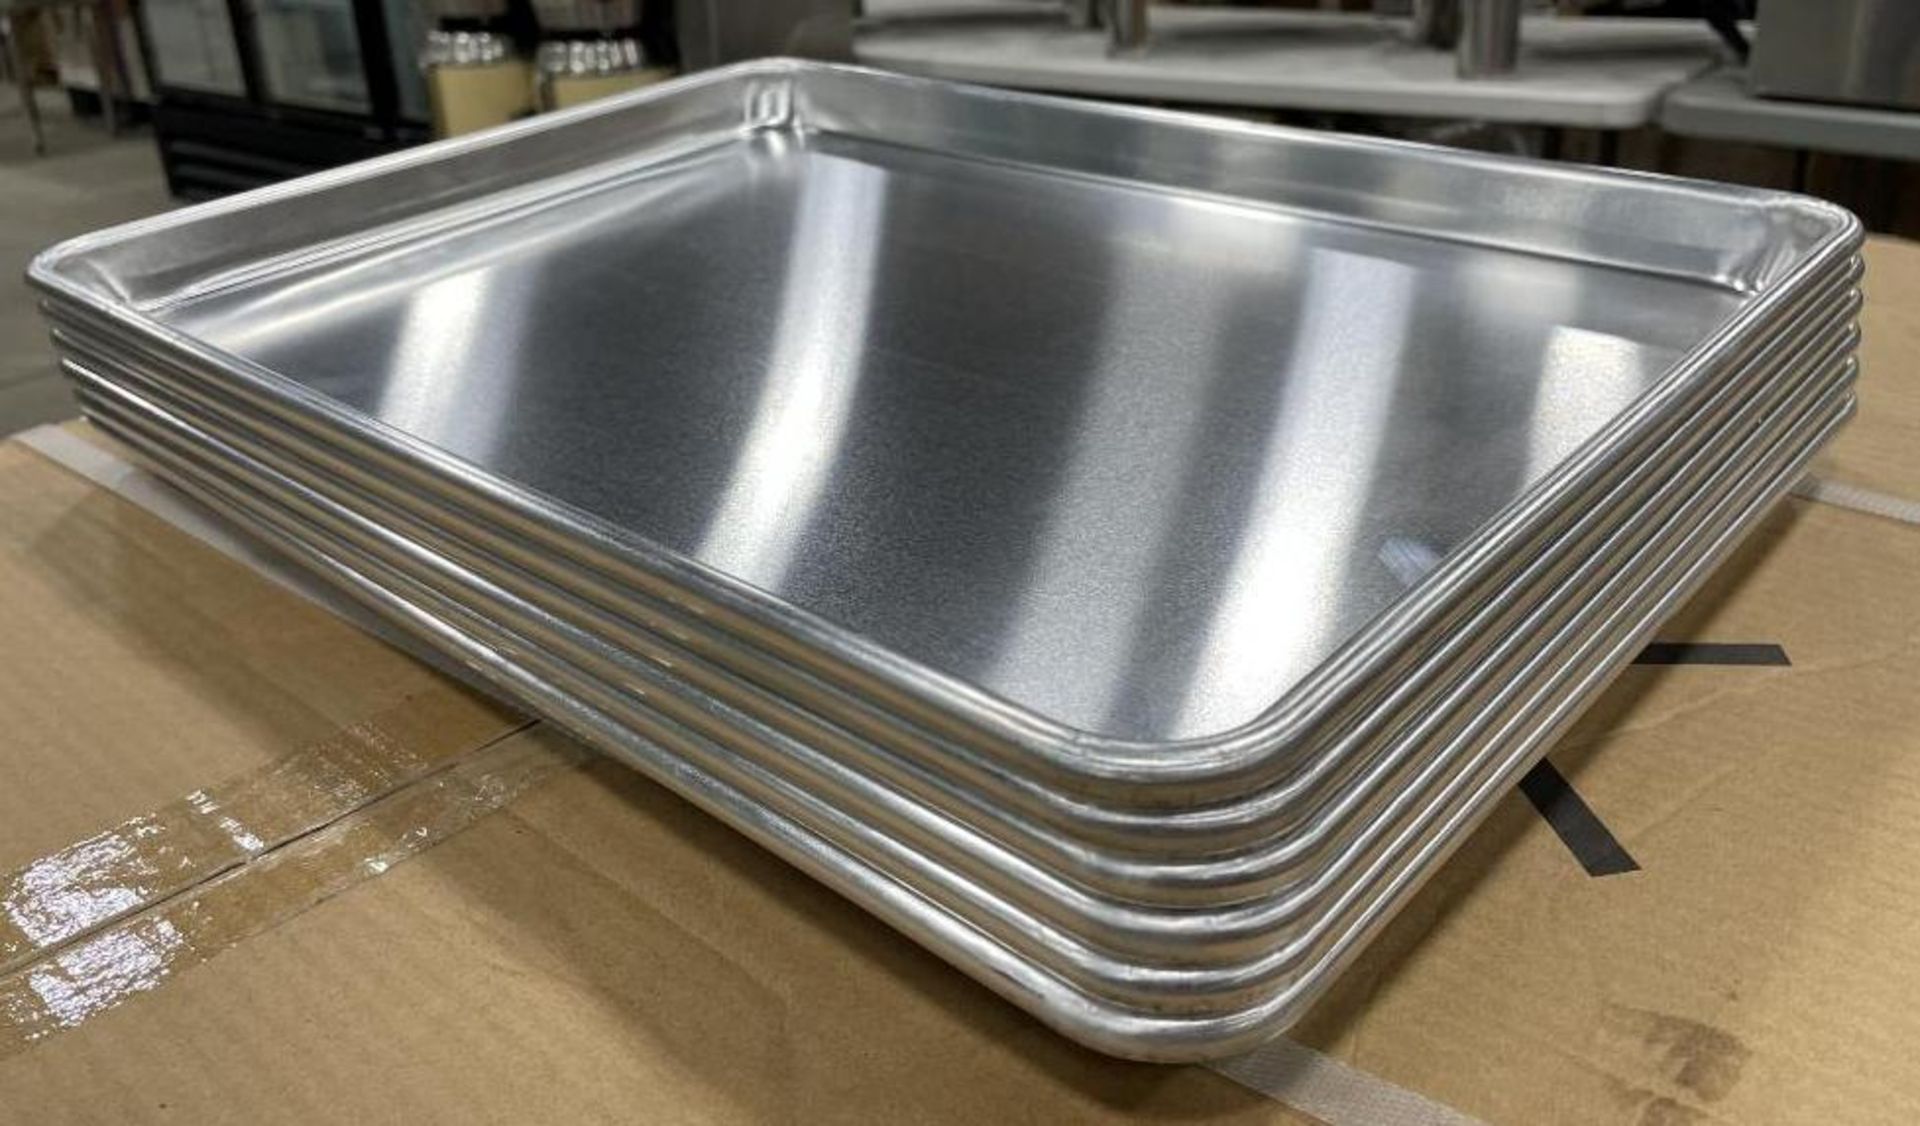 LOT OF (6) HALF SIZE BUN PANS, UPDATE ABNP-50 - NEW - Image 6 of 6